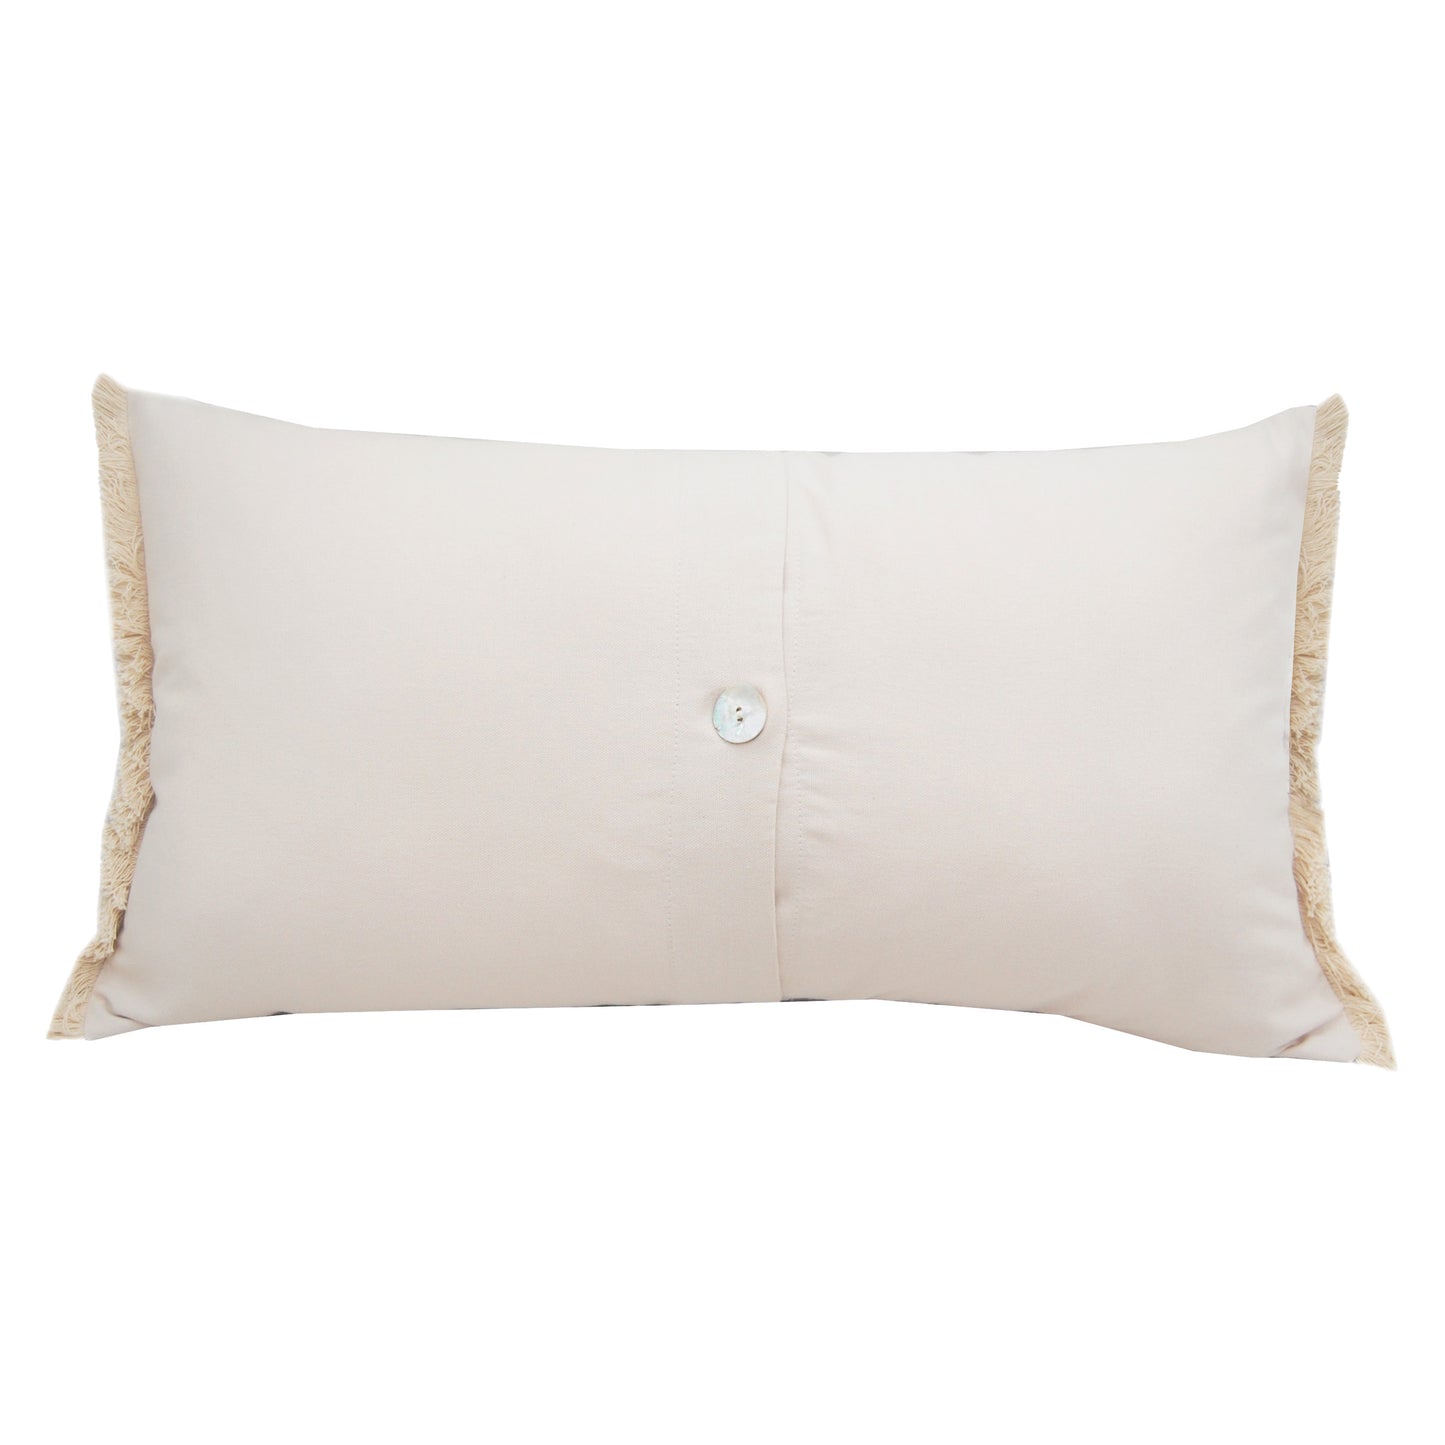 Back side of the Sand and Shells Fringed Lumbar Pillow. Pillow finished with fringed edges and button encloser. 